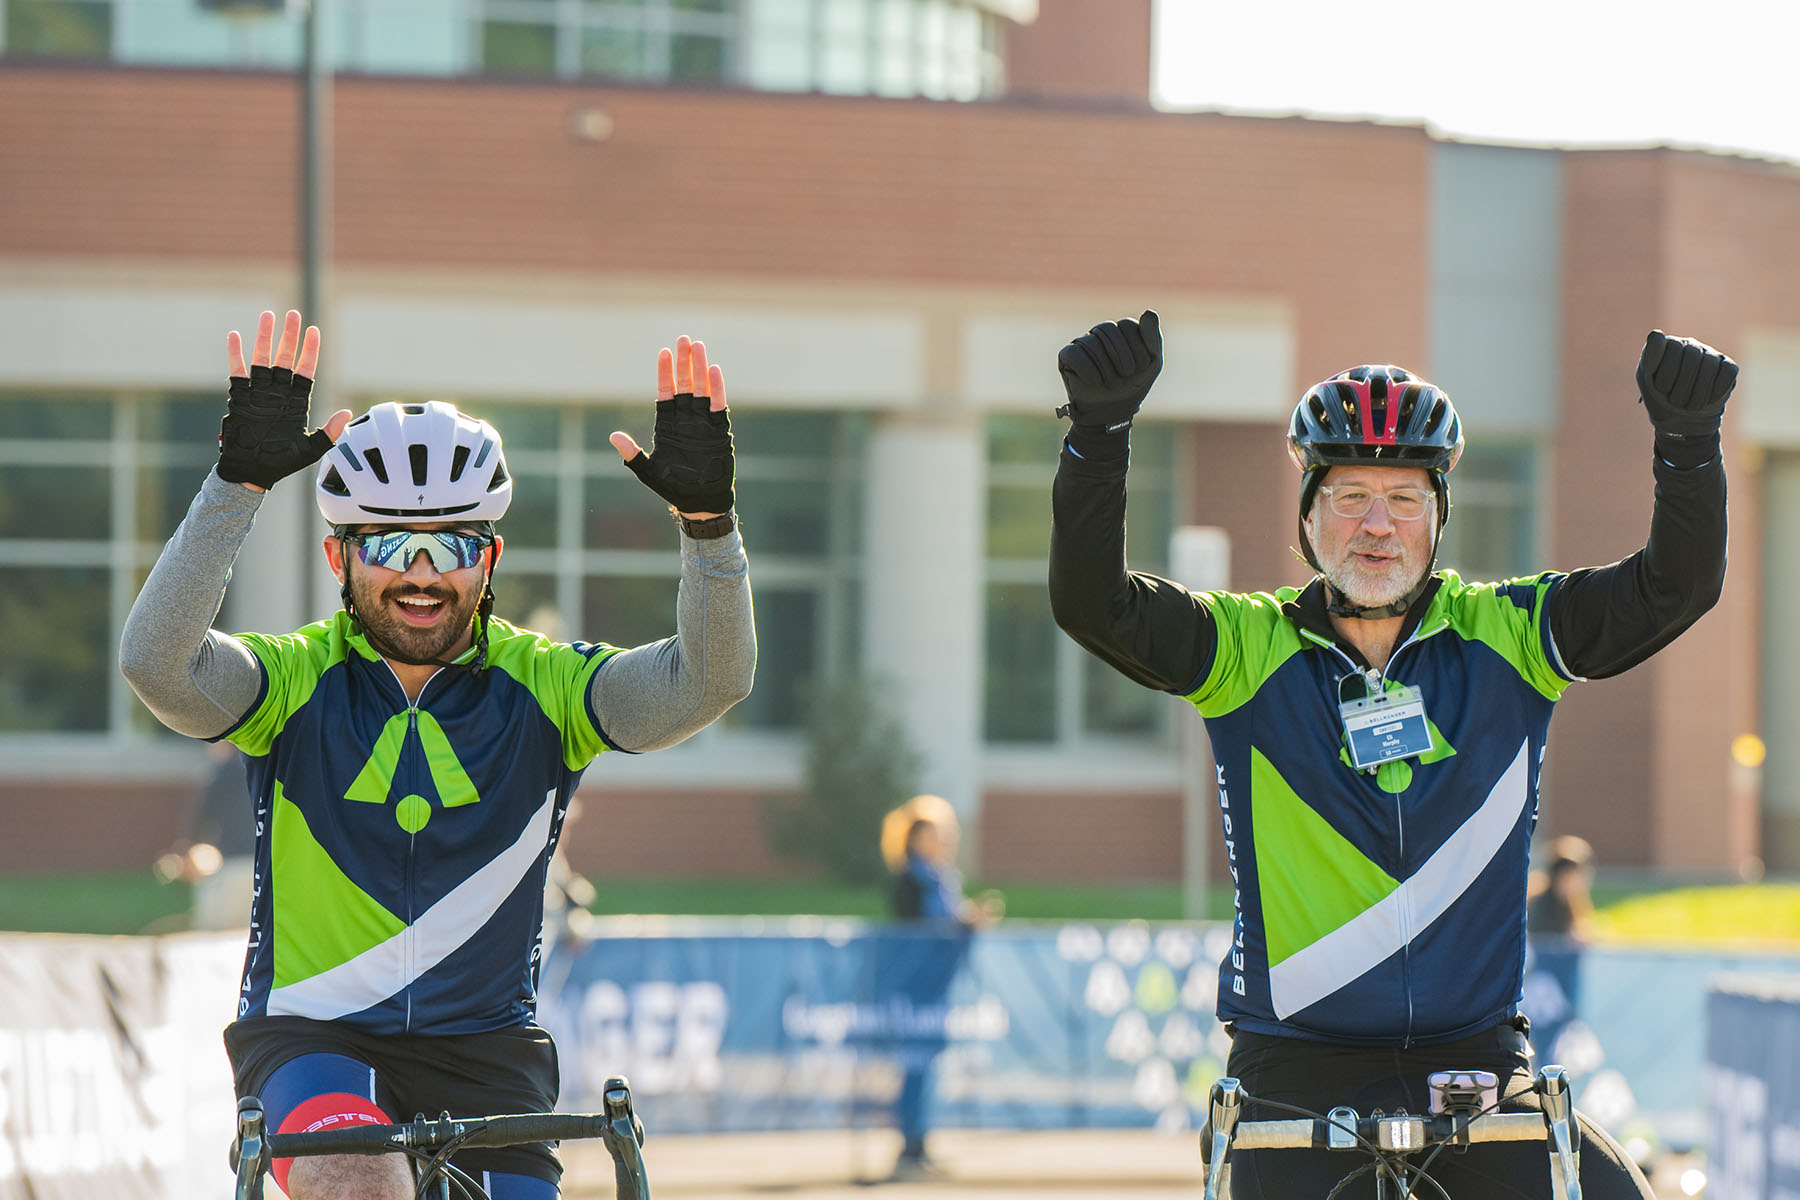 Two BellRinger riders celebrating as they ride their bikes across the finish line